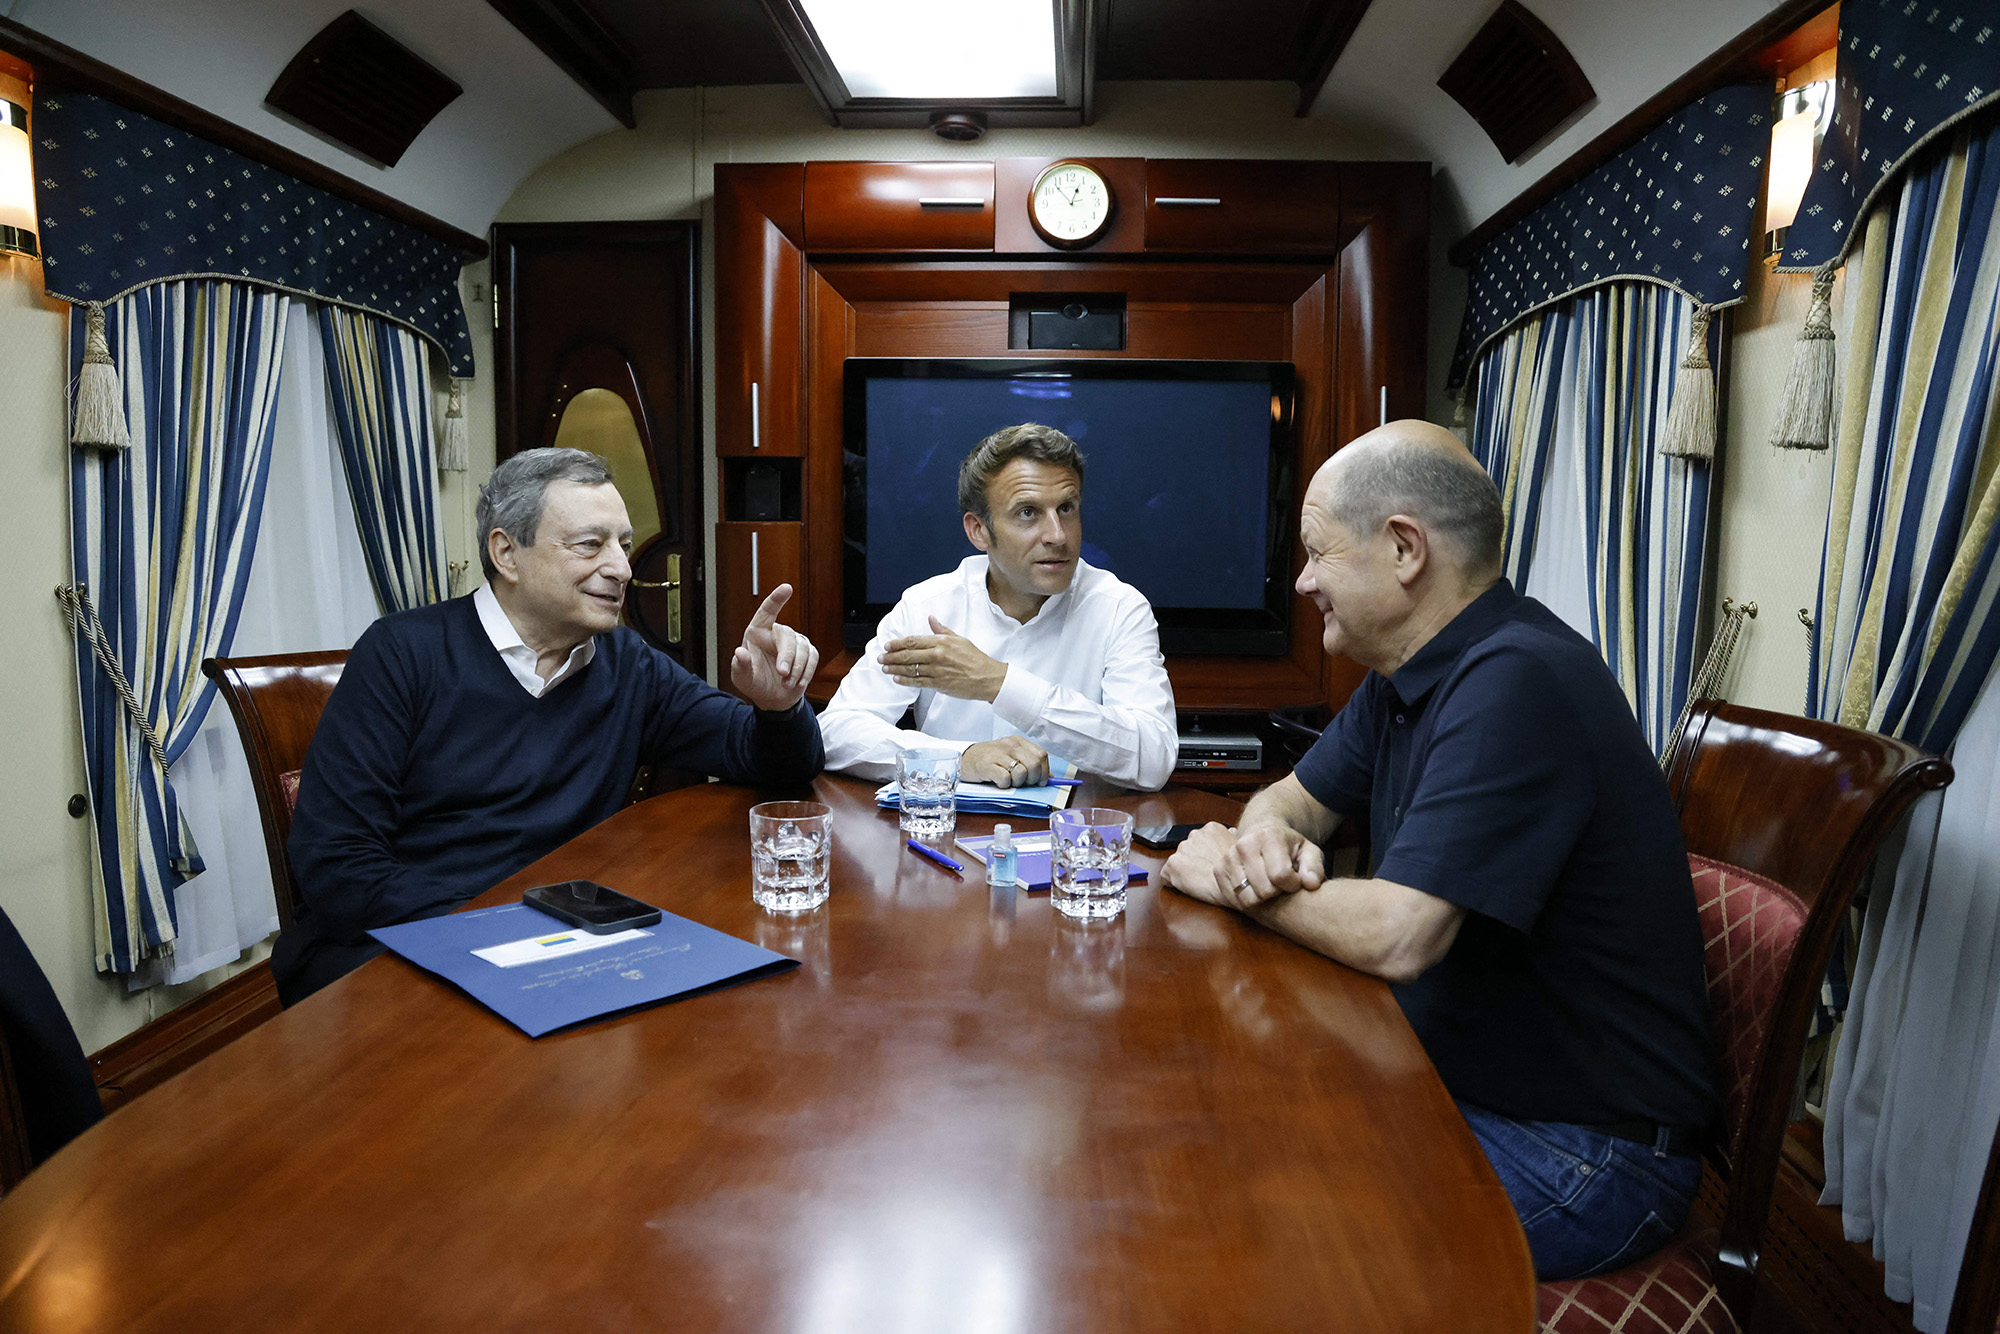 French President Emmanuel Macron, center, German Chancellor Olaf Scholz, right, and Italian Prime Minister Mario Draghi, left, travel on board a train bound to Kyiv, Ukraine, after departing from Poland on June 16.